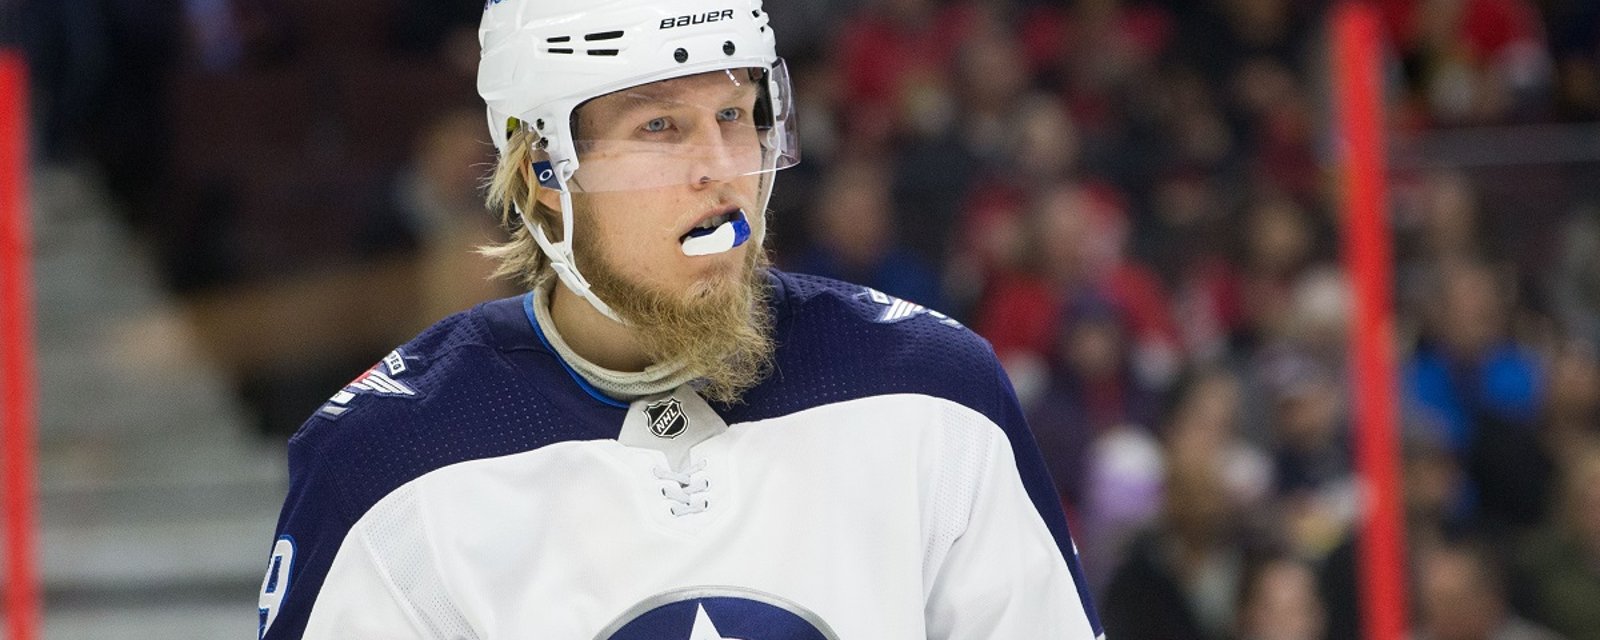 Rumor: Patrik Laine may demand a trade from the Jets.